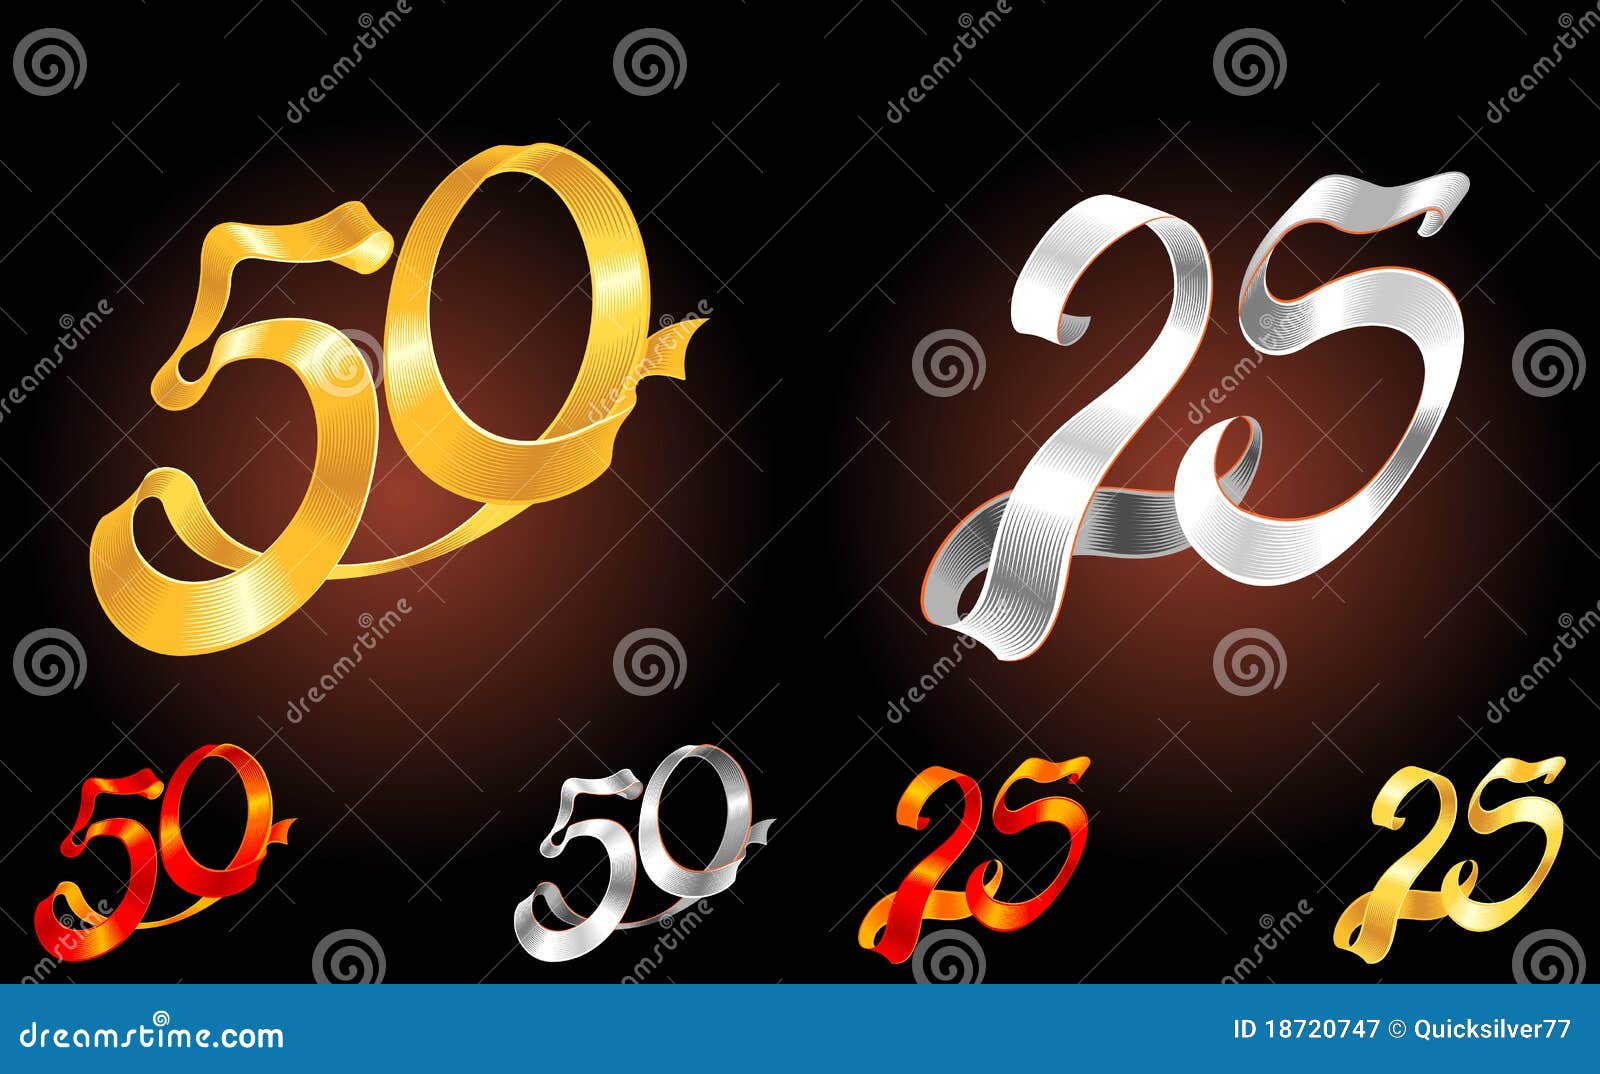 Gold And Silver Ribbon Anniversary Royalty Free Stock Photography - Image: 187207471300 x 889